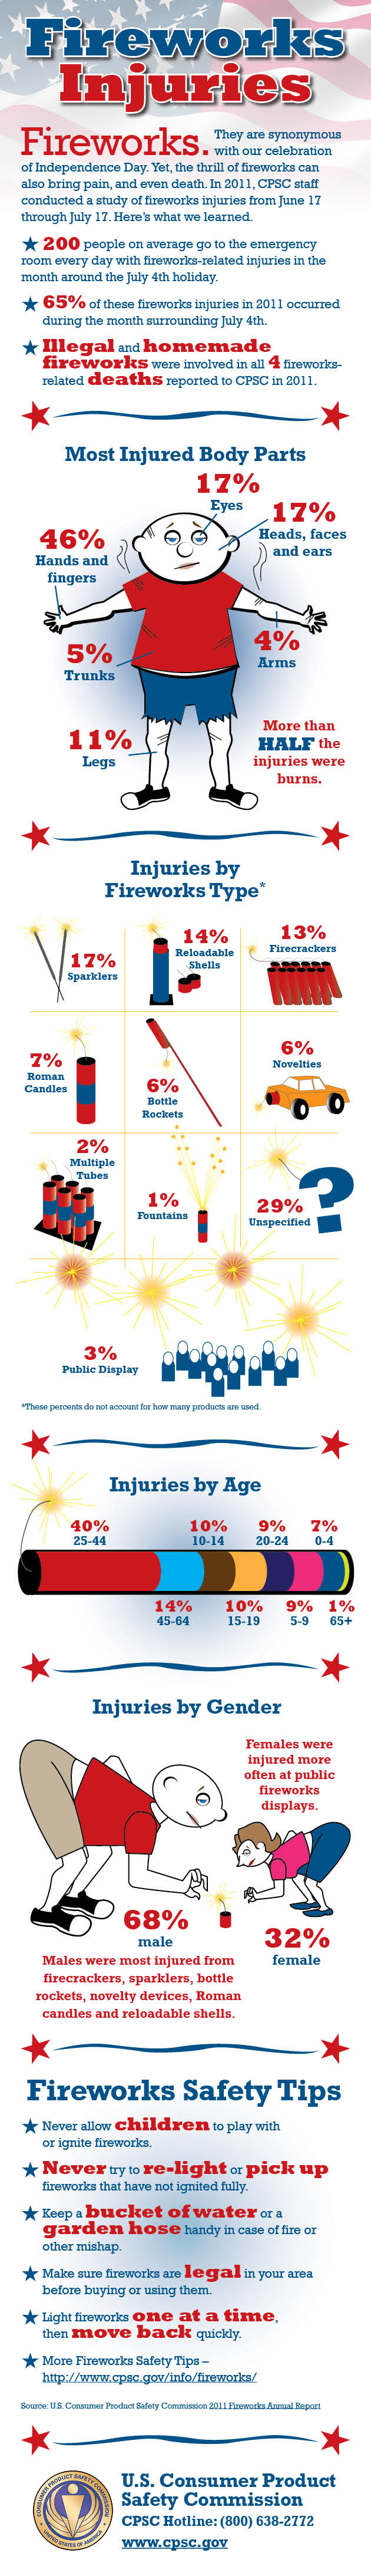 Fireworks Injuries infographic